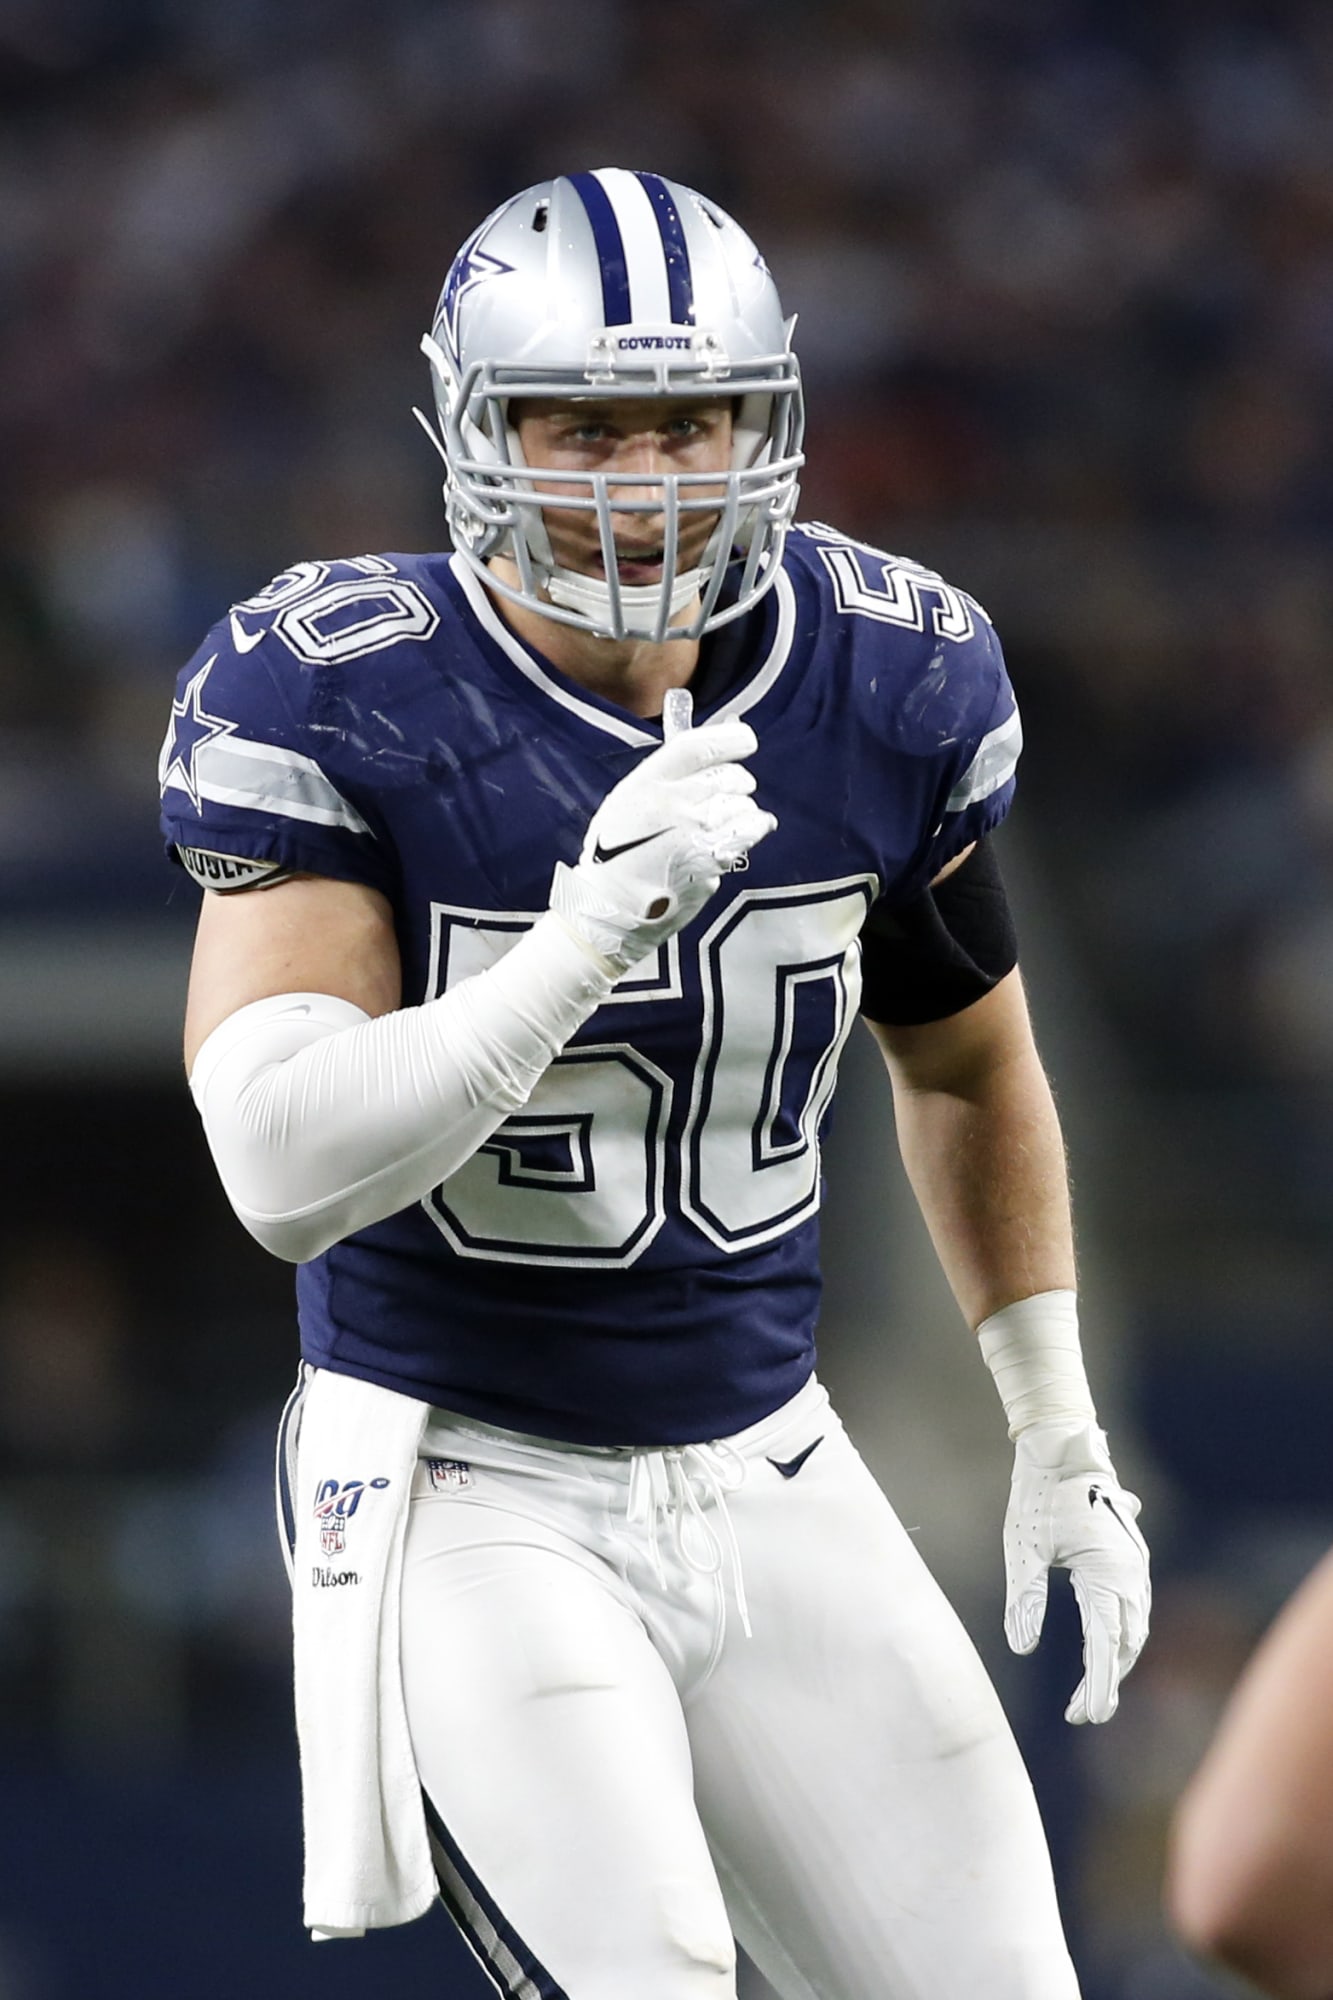 Penn State Football great Sean Lee announces retirement from NFL